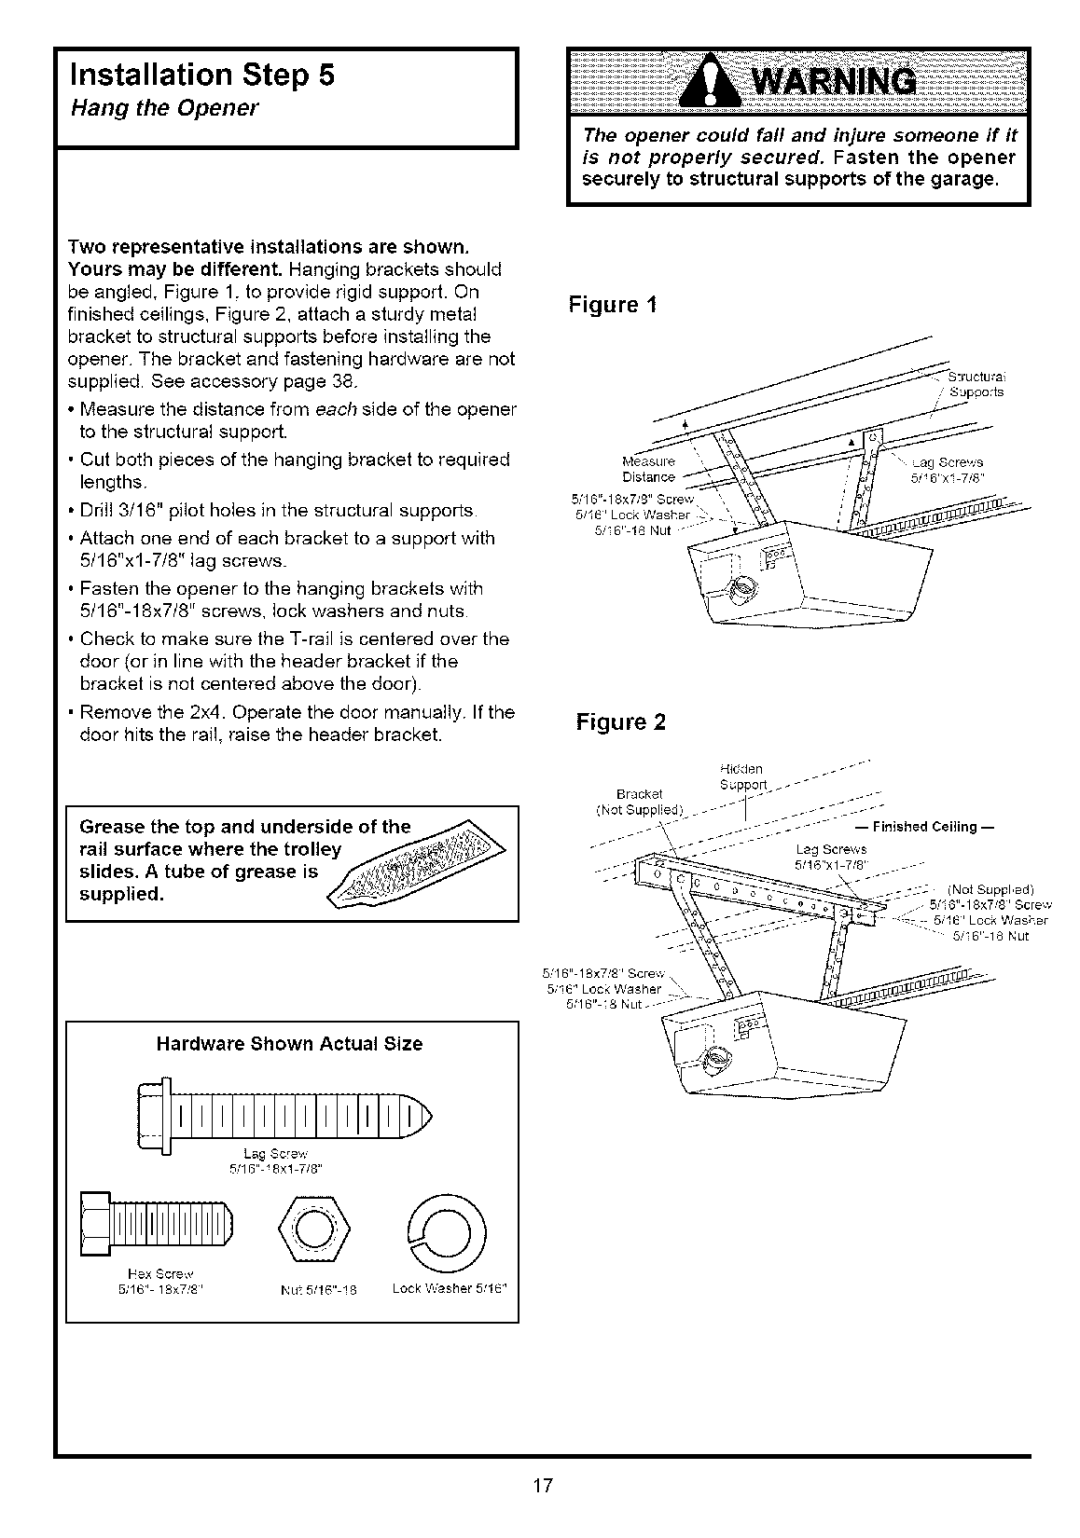 Sears 139.53525SRT, 139.53636SRT owner manual Nstallation Step, Hang the Opener, Two representative installations are shown 